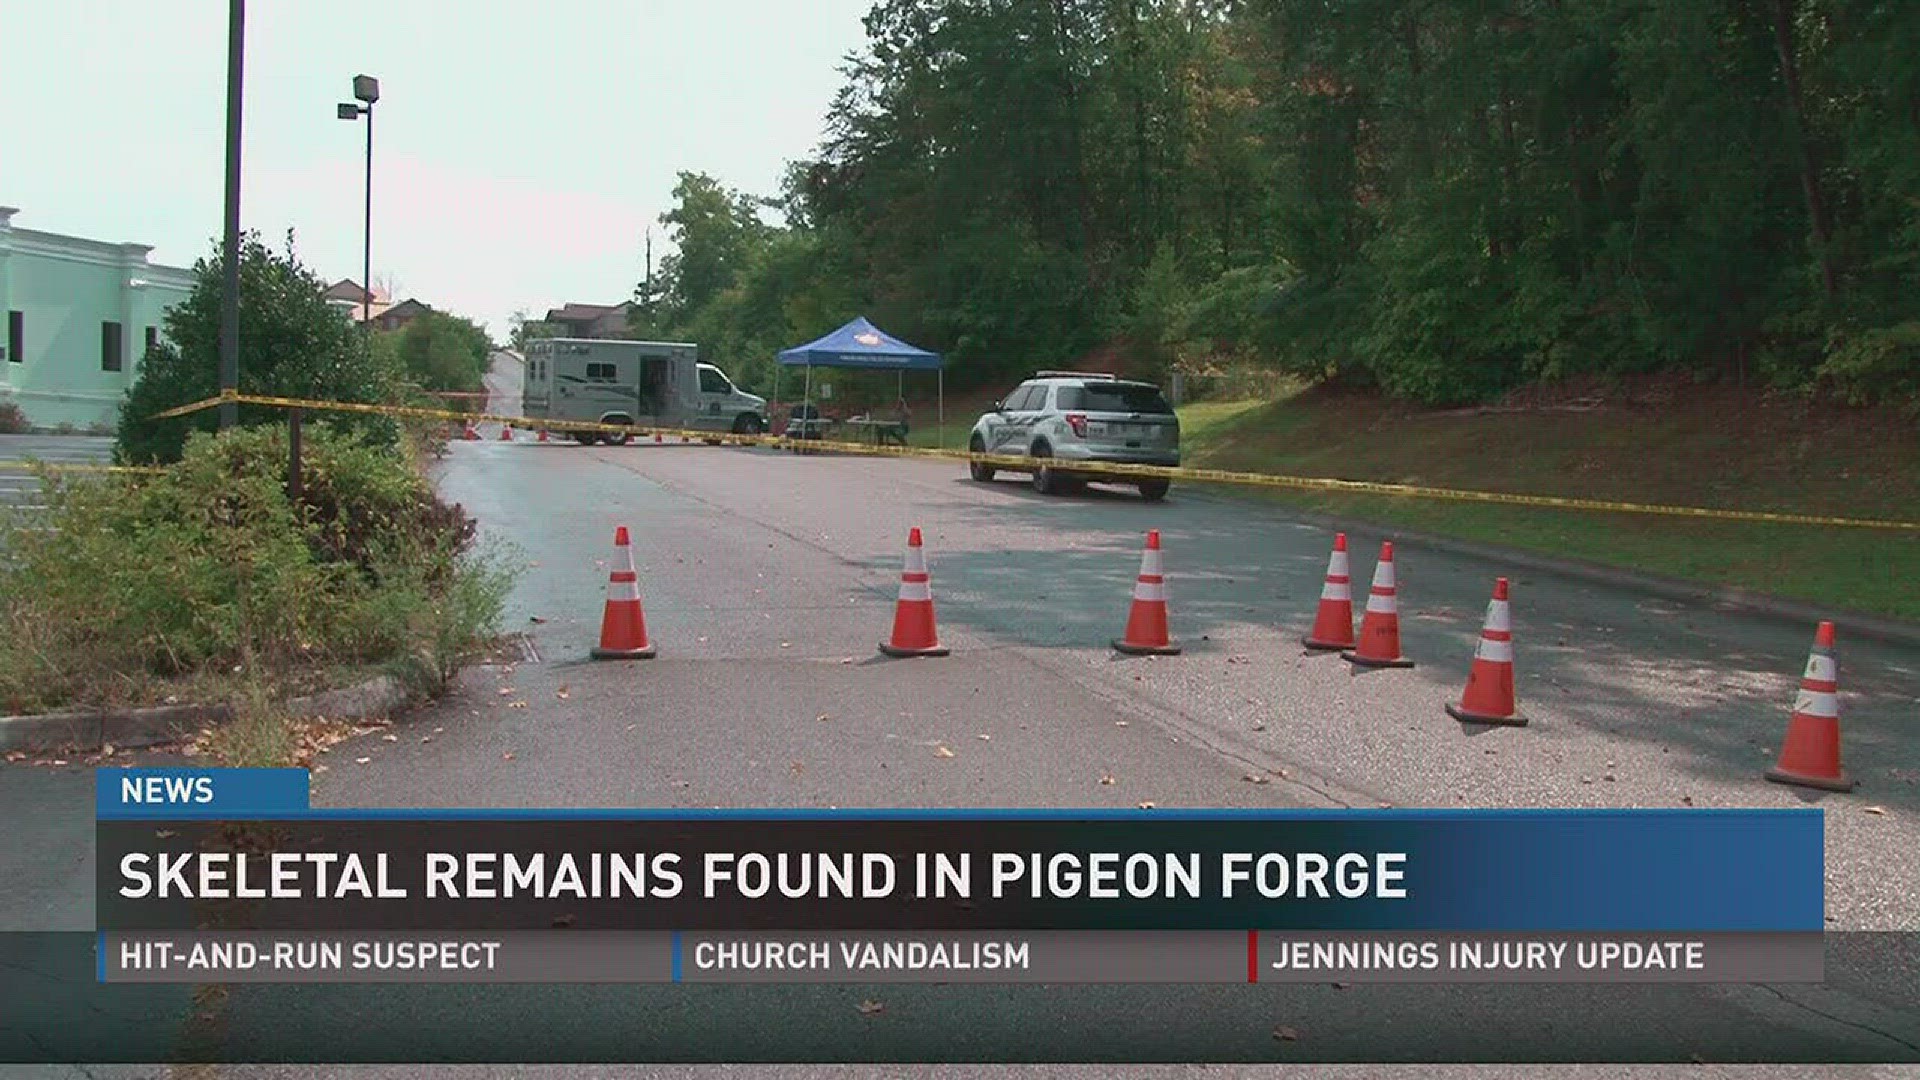 Pigeon Forge Police are investigating human remains found near a hotel in a tent.